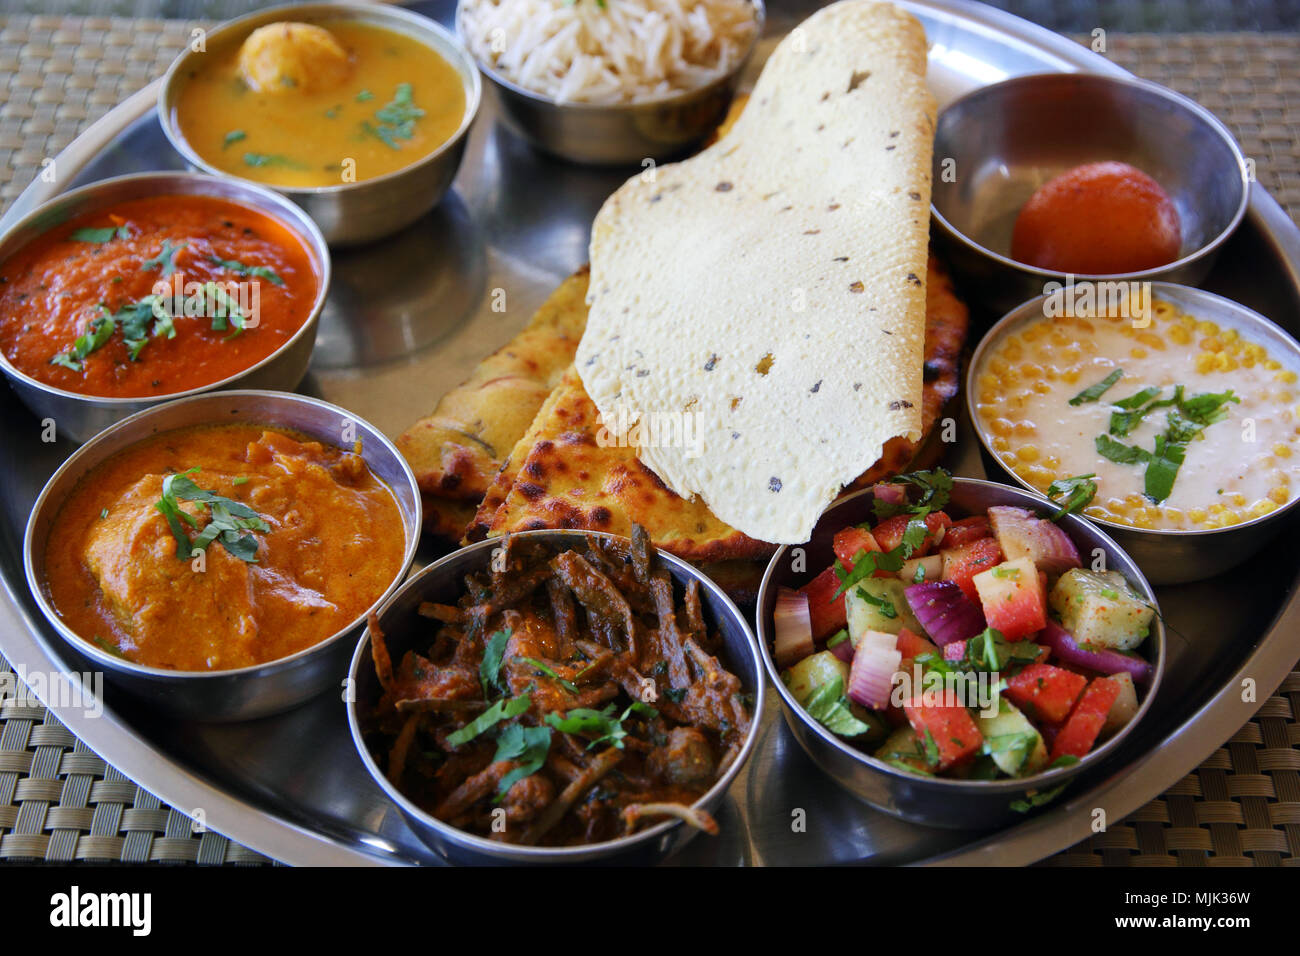 Typical indian food from Jaipur - thali rajasthani Stock Photo